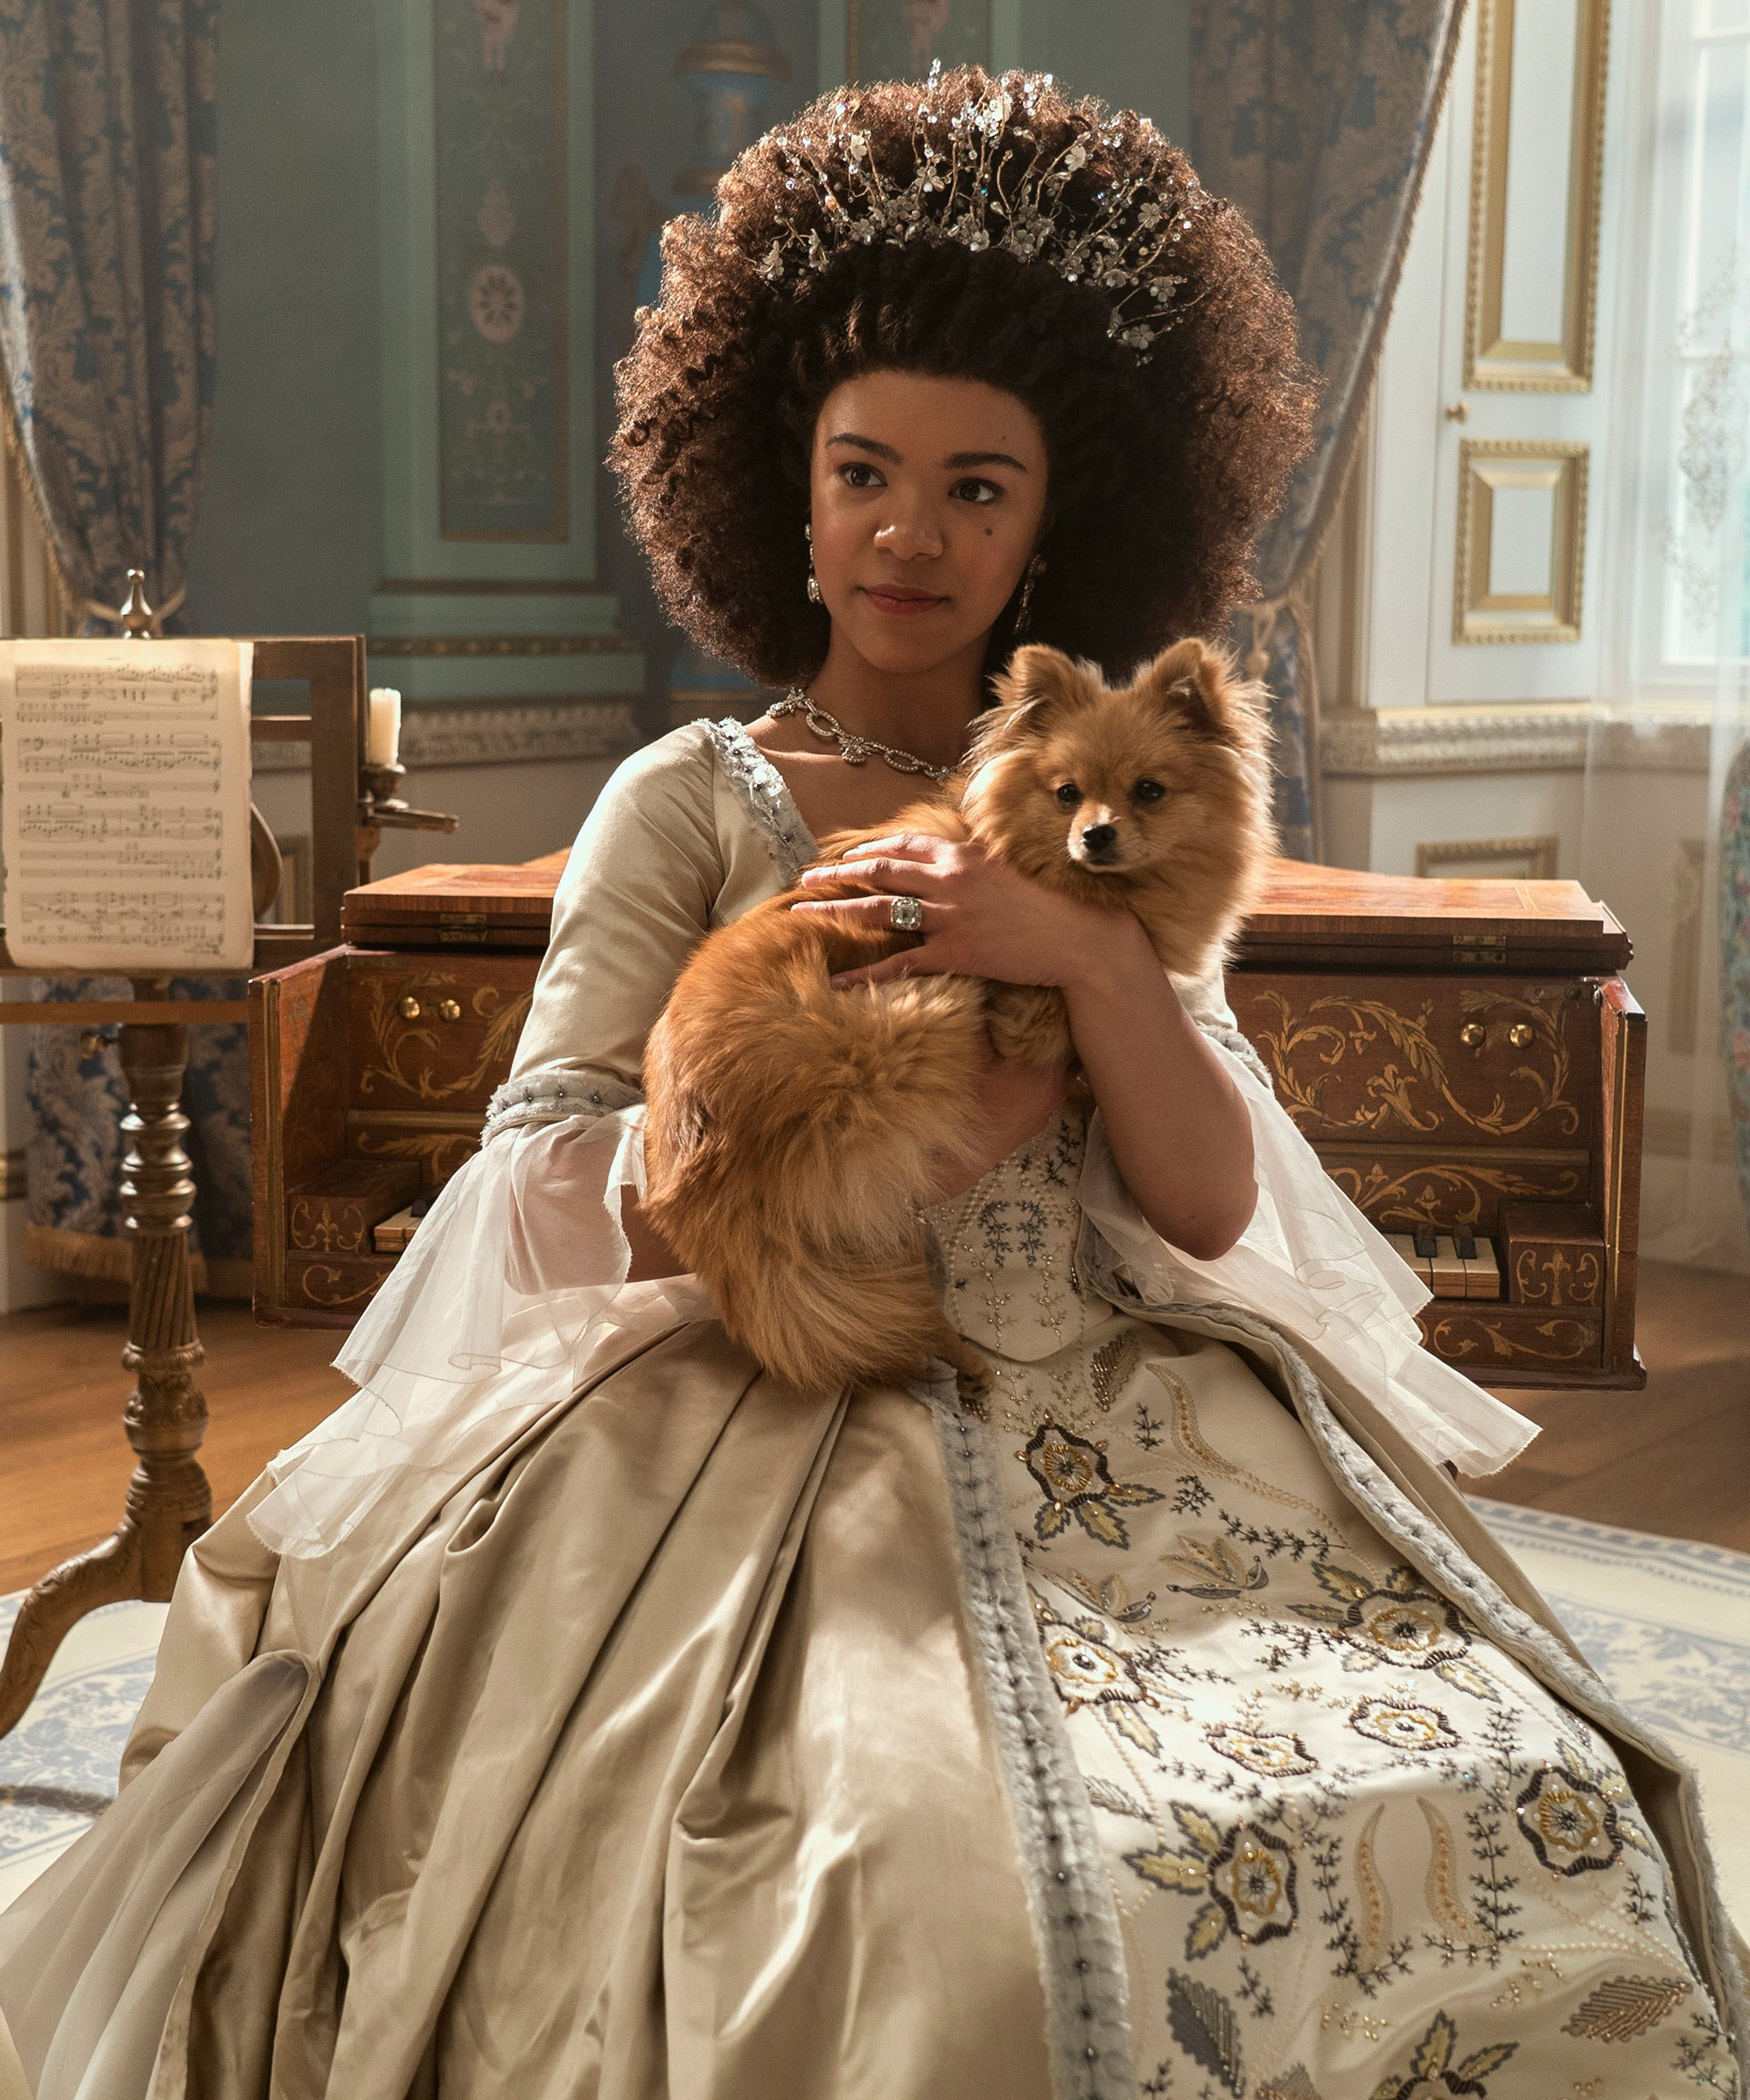 On Queen Charlotte A Bridgerton Story, Race and Romance pic